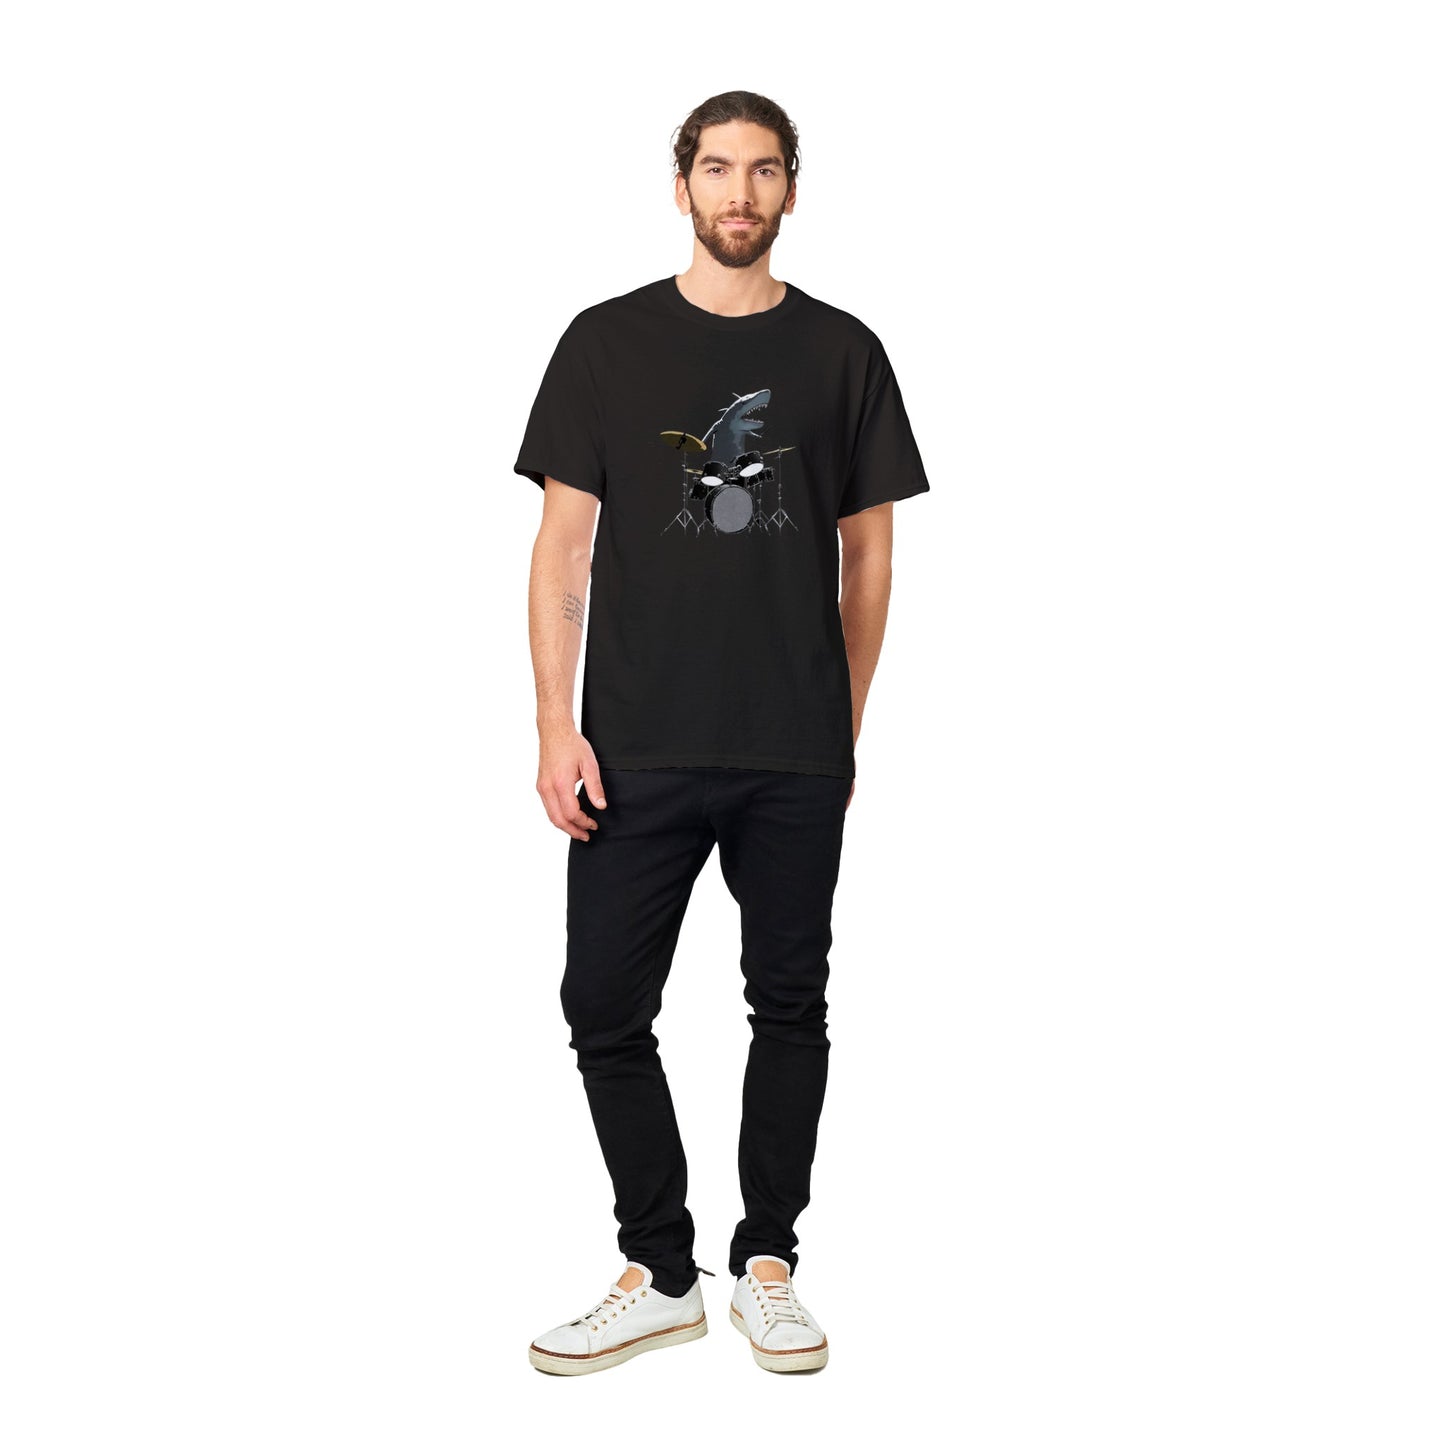 Guy wearing a black t-shirt with a shark playing drums illustration